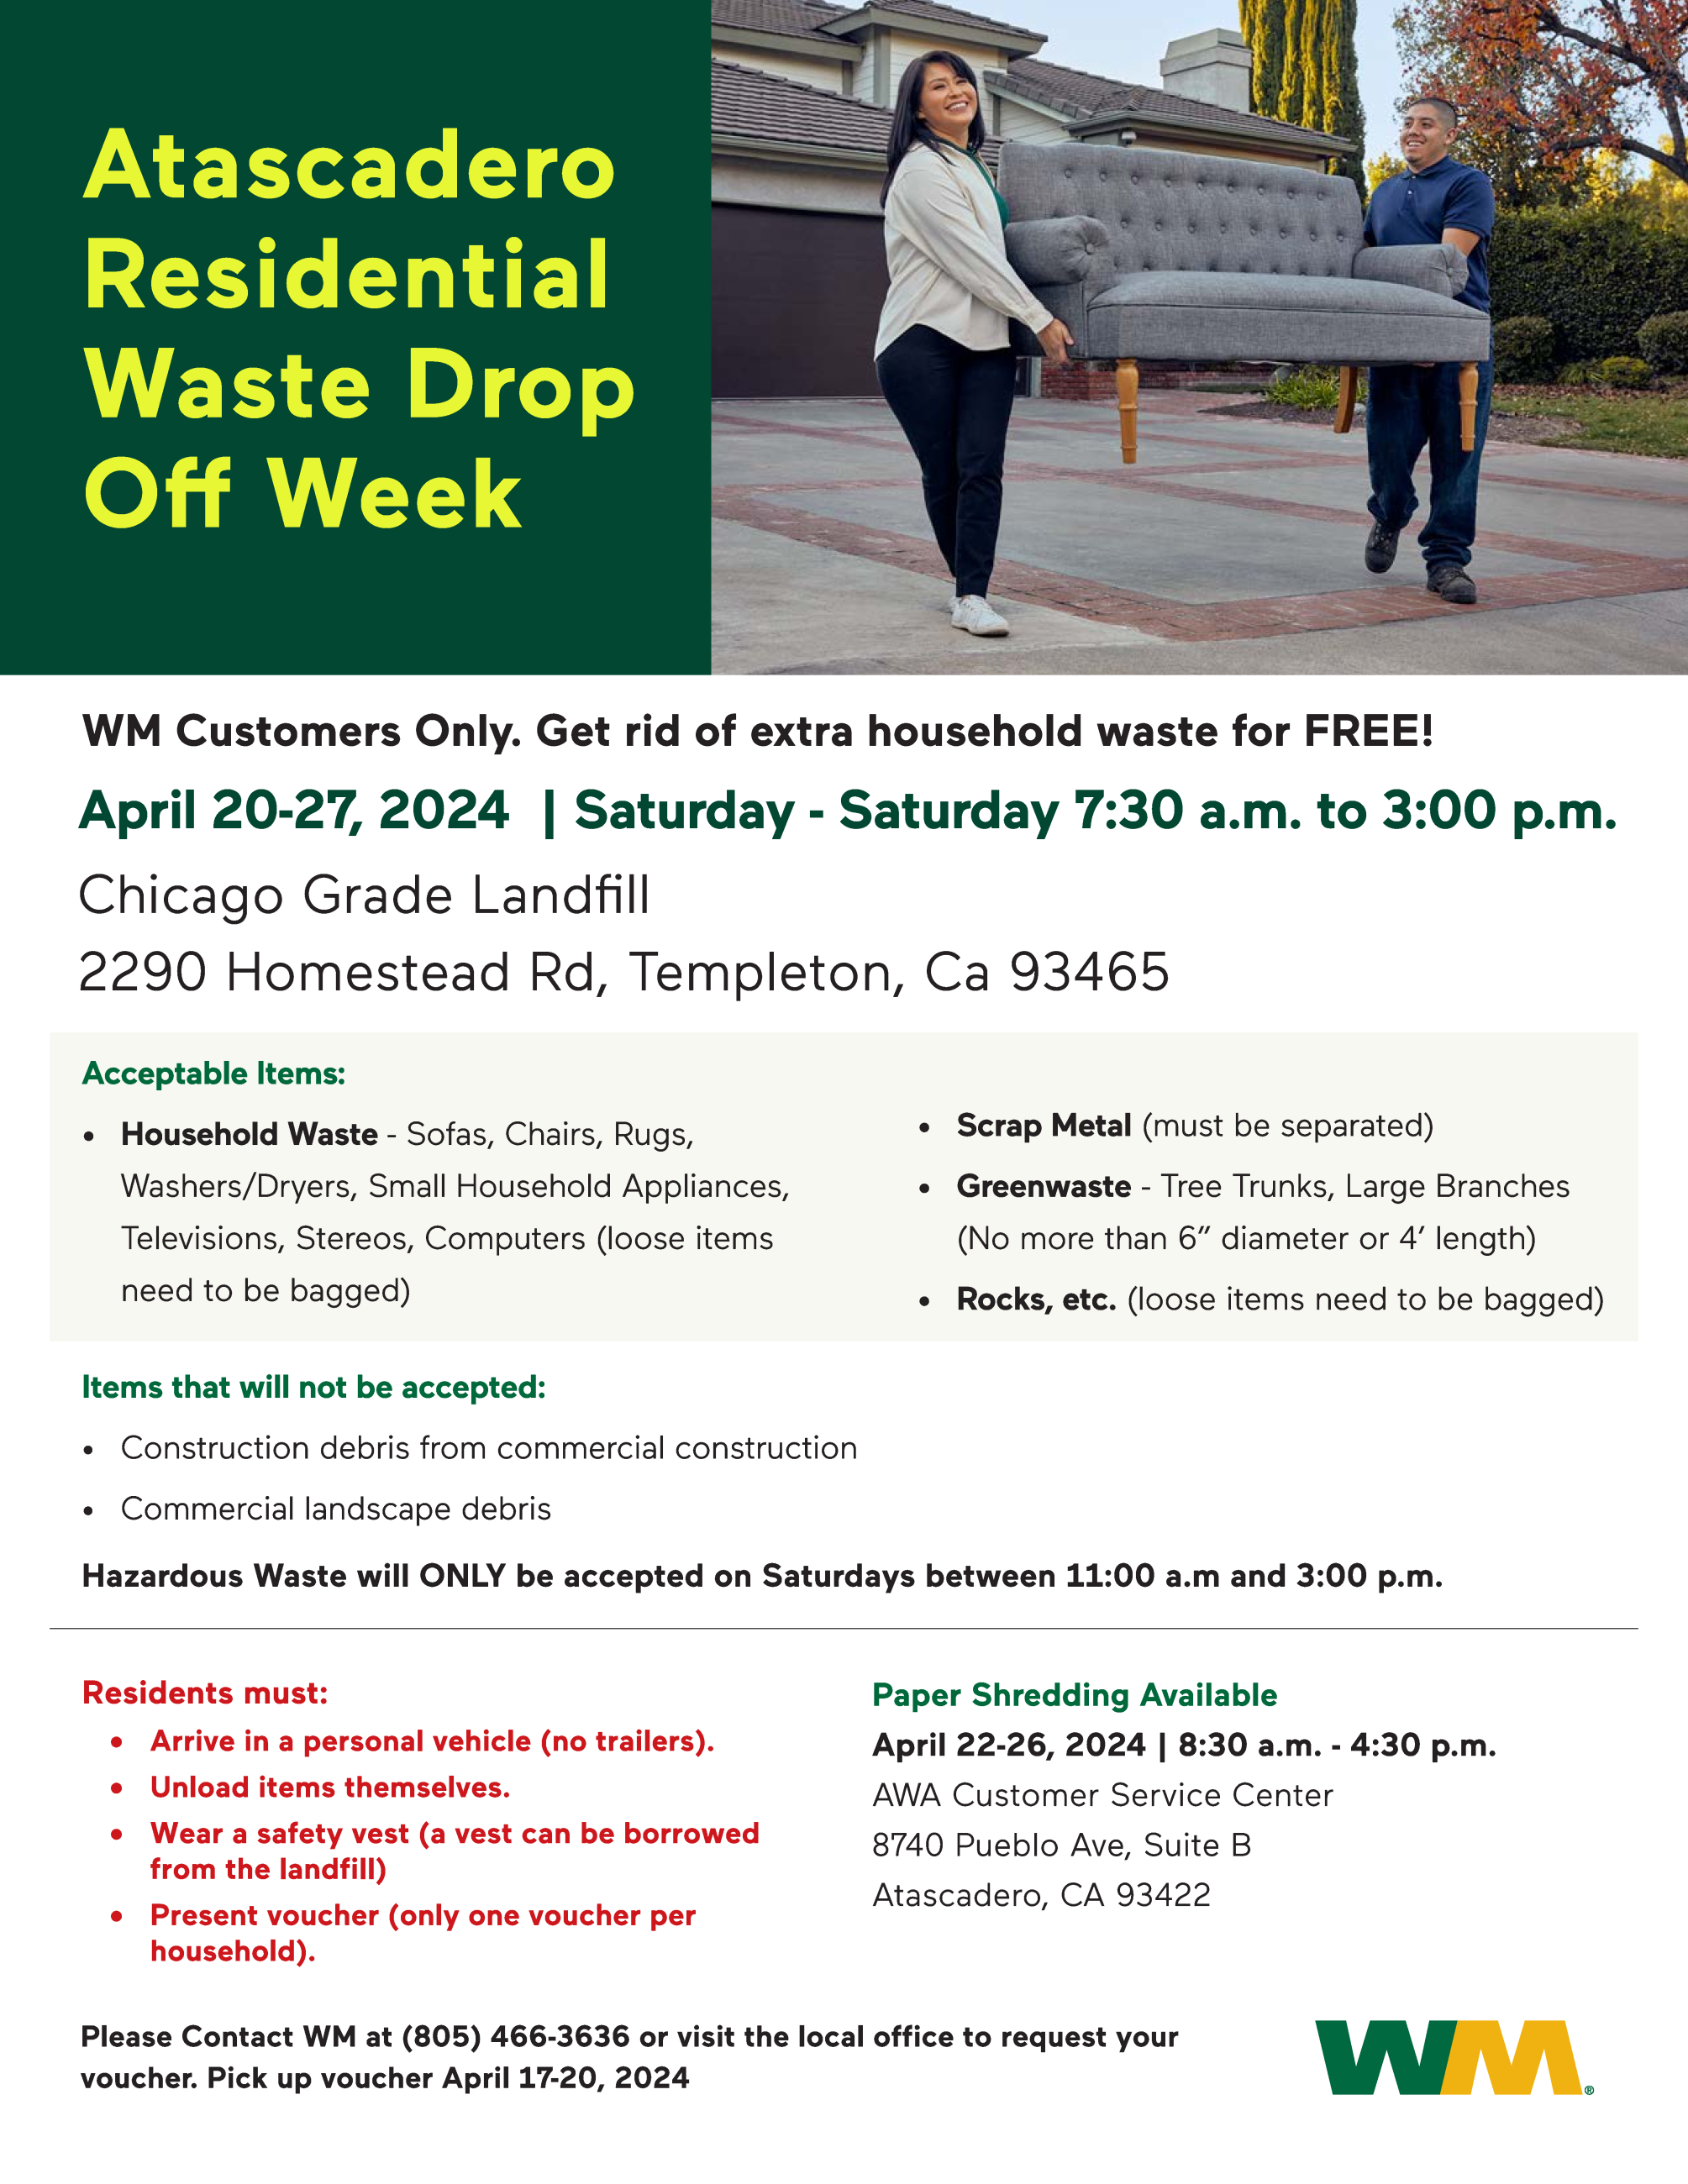 Flyer for Atascadero Residential Waste Drop Off Week Event